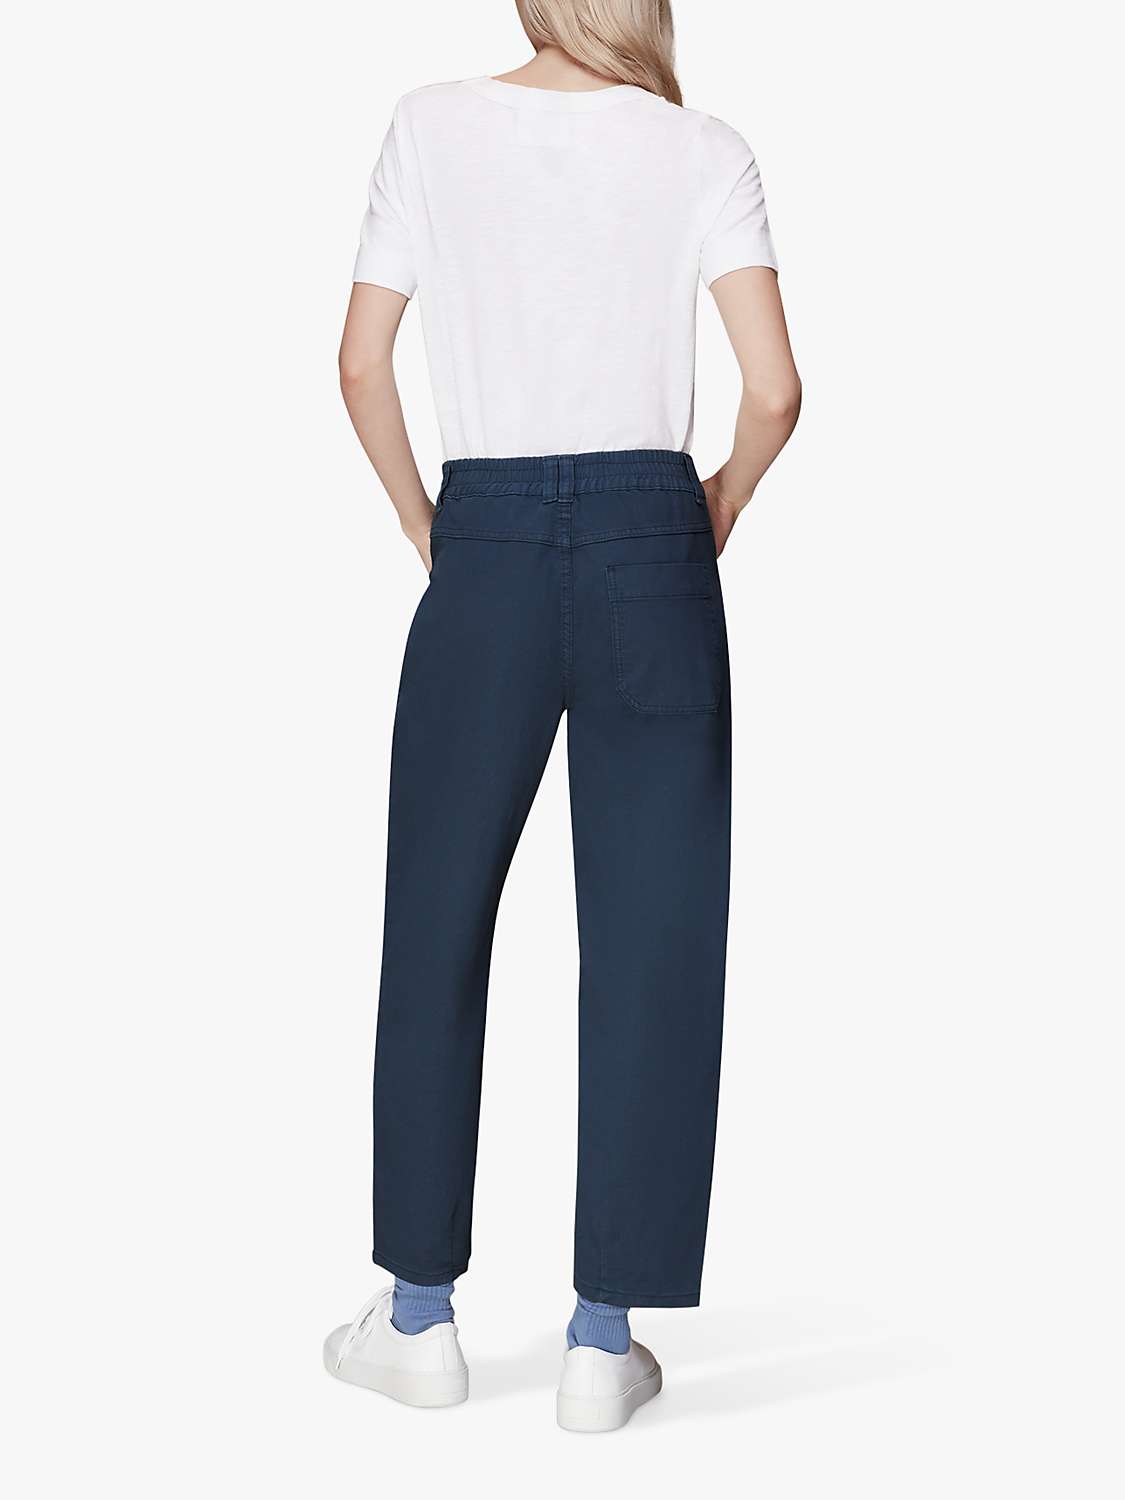 Whistles Tessa Casual Trousers, Navy, Navy at John Lewis & Partners